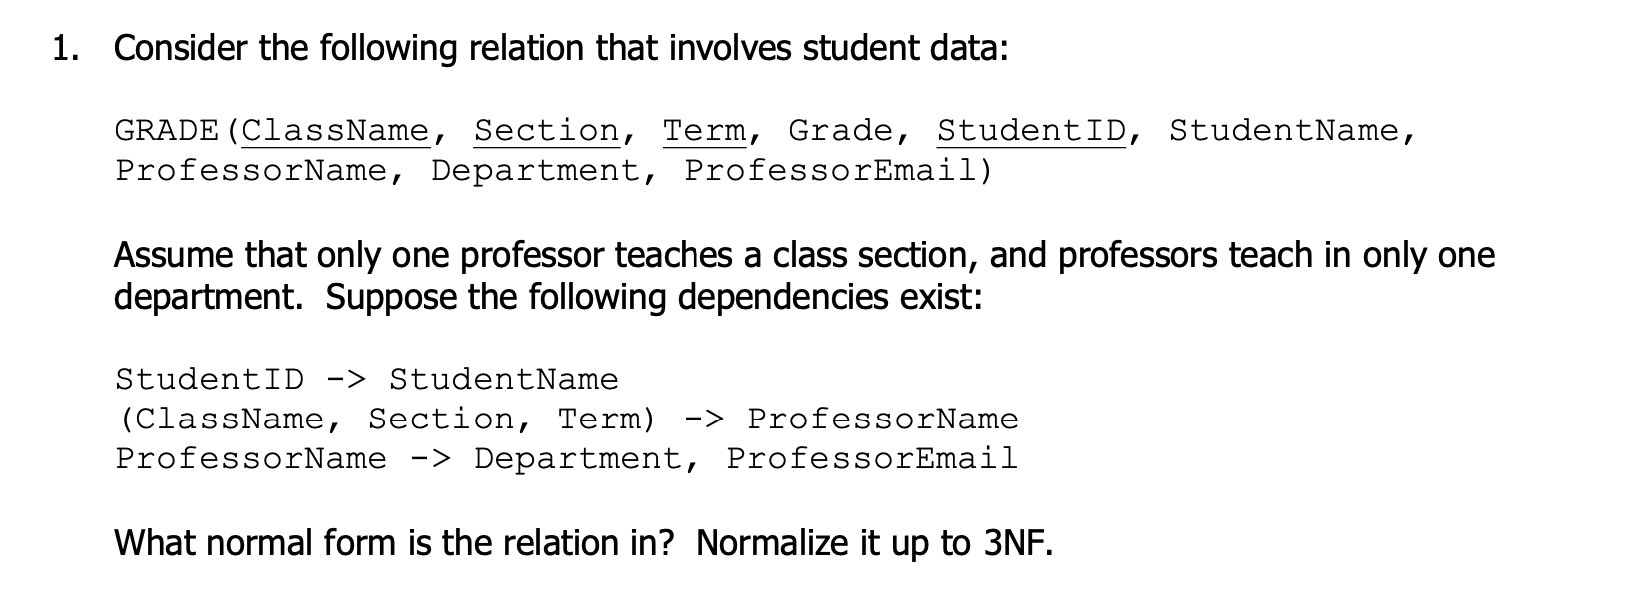 1. Consider the following relation that involves student data:
GRADE (ClassName, Section, Term, Grade, StudentID, StudentName,
ProfessorName, Department, ProfessorEmail)
Assume that only one professor teaches a class section, and professors teach in only one
department. Suppose the following dependencies exist:
StudentID -> StudentName
(ClassName, Section, Term) -> ProfessorName
ProfessorName -> Department, ProfessorEmail
What normal form is the relation in? Normalize it up to 3NF.
